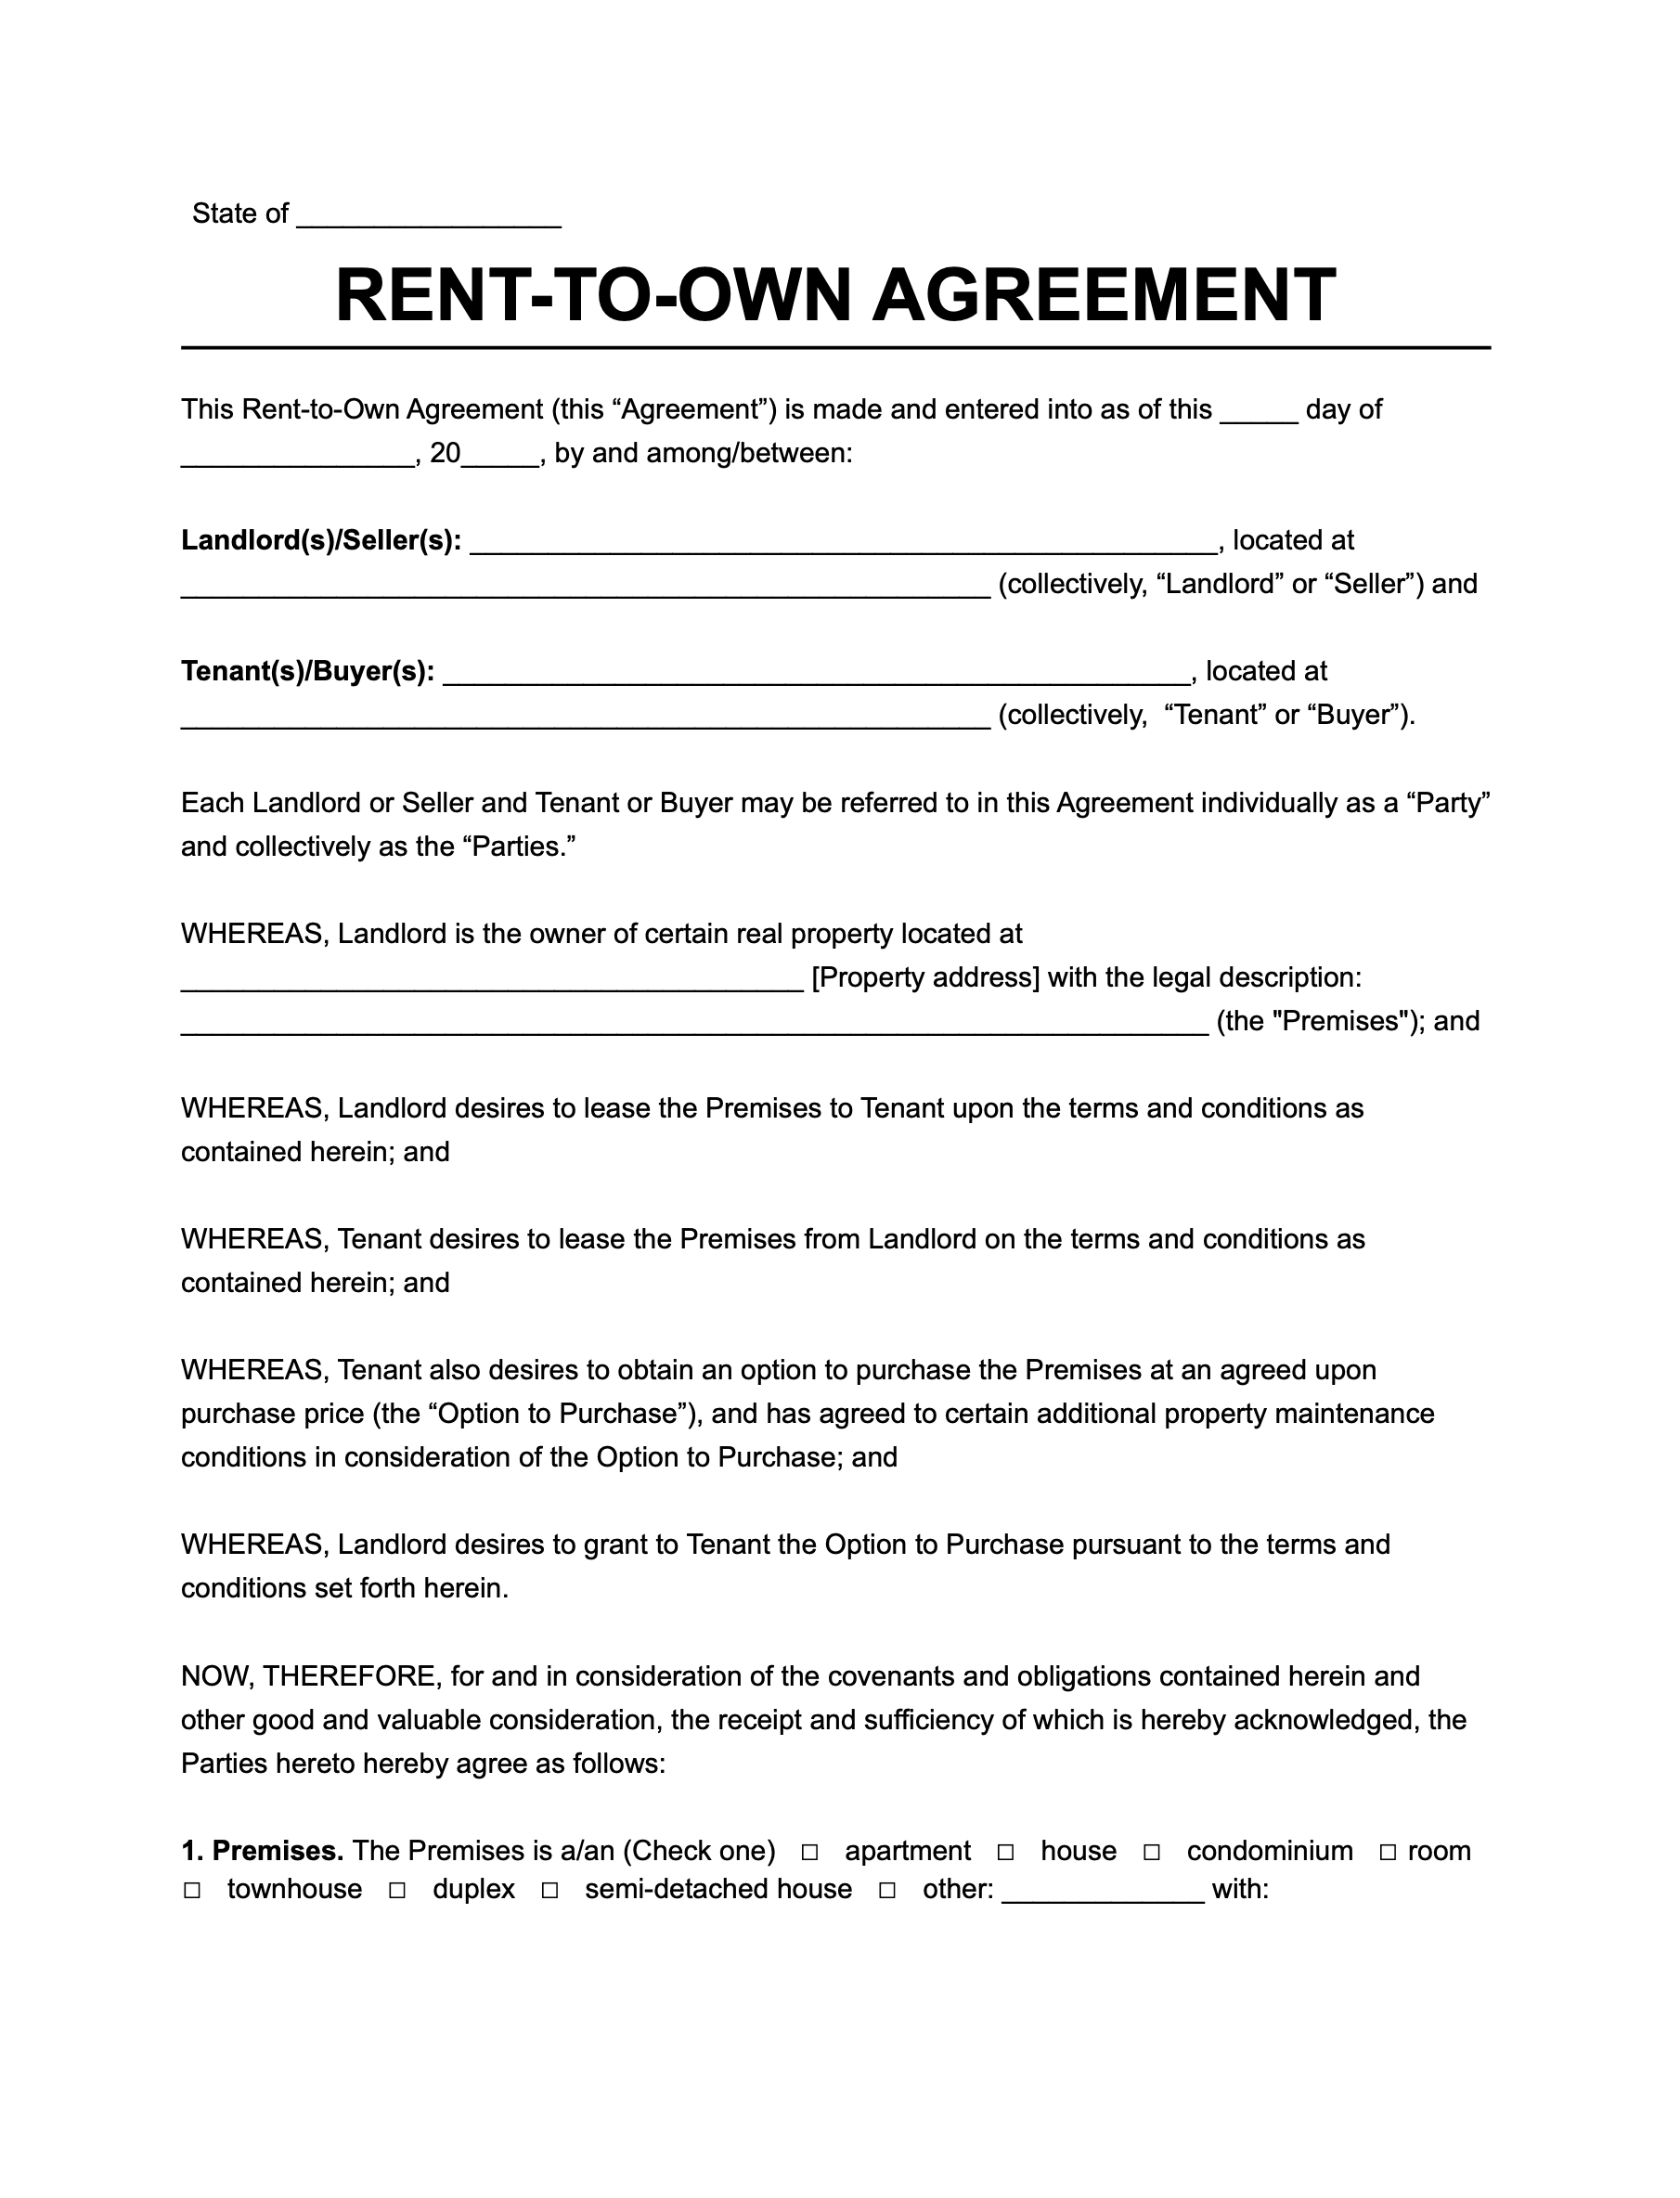 Rent-to-Own Agreement